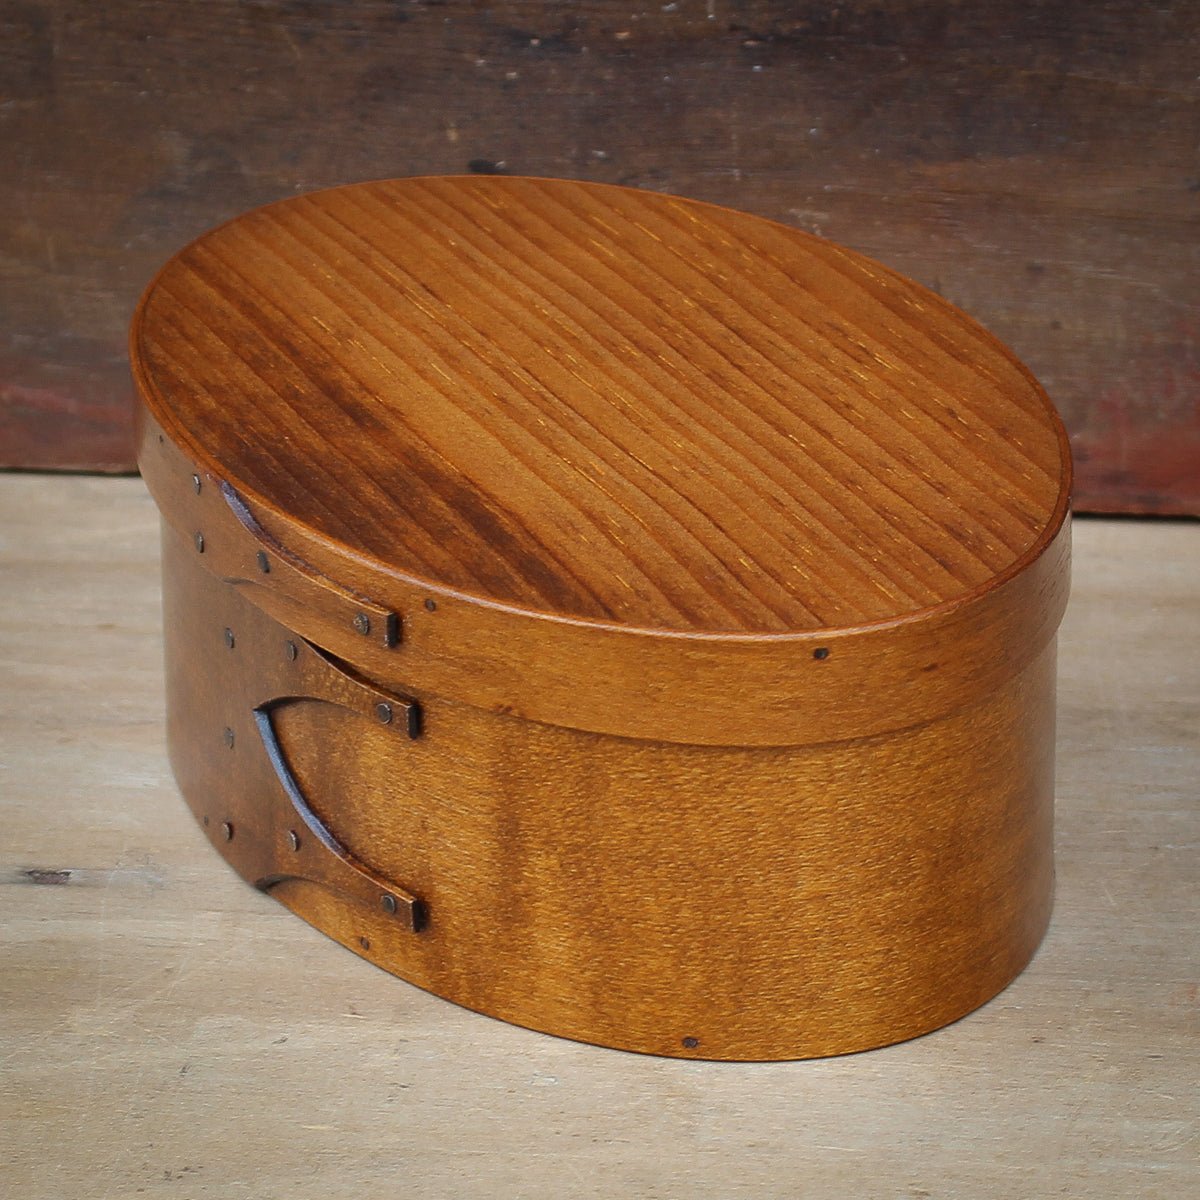 Shaker Oval Box, Size #3, LeHays Shaker Boxes, Handcrafted in Maine.  Antiqued Natural Finish, Side View